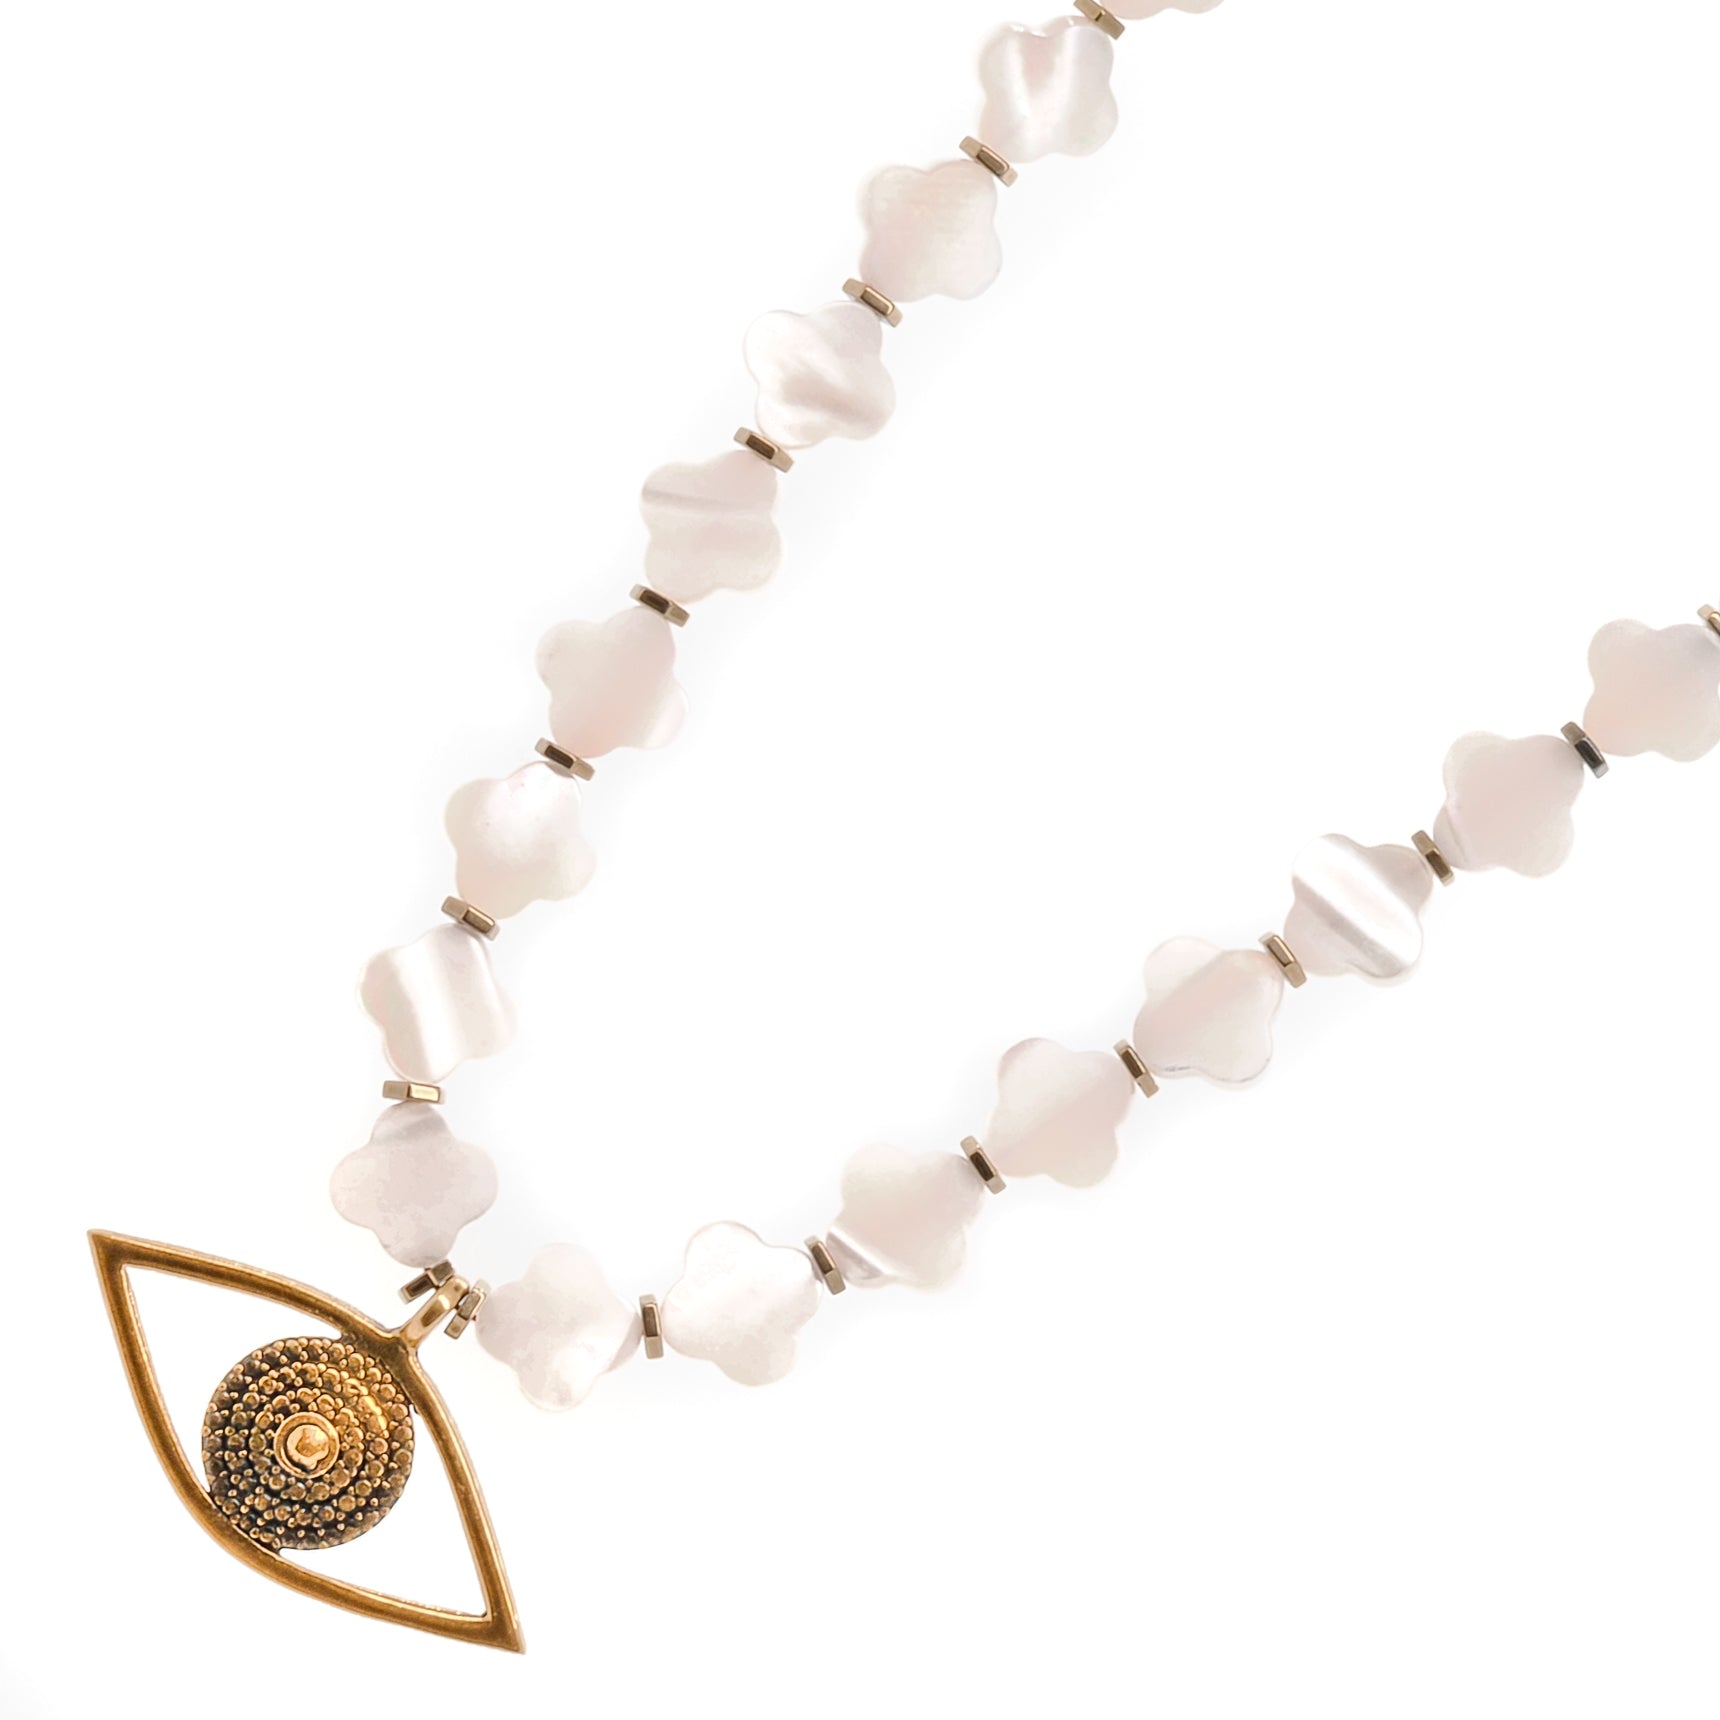 The Alhambra Evil Eye Choker Necklace is a stunning statement piece that's perfect for layering with other necklaces, featuring delicate pearl Alhambra flower beads and a powerful Evil Eye Pendant.